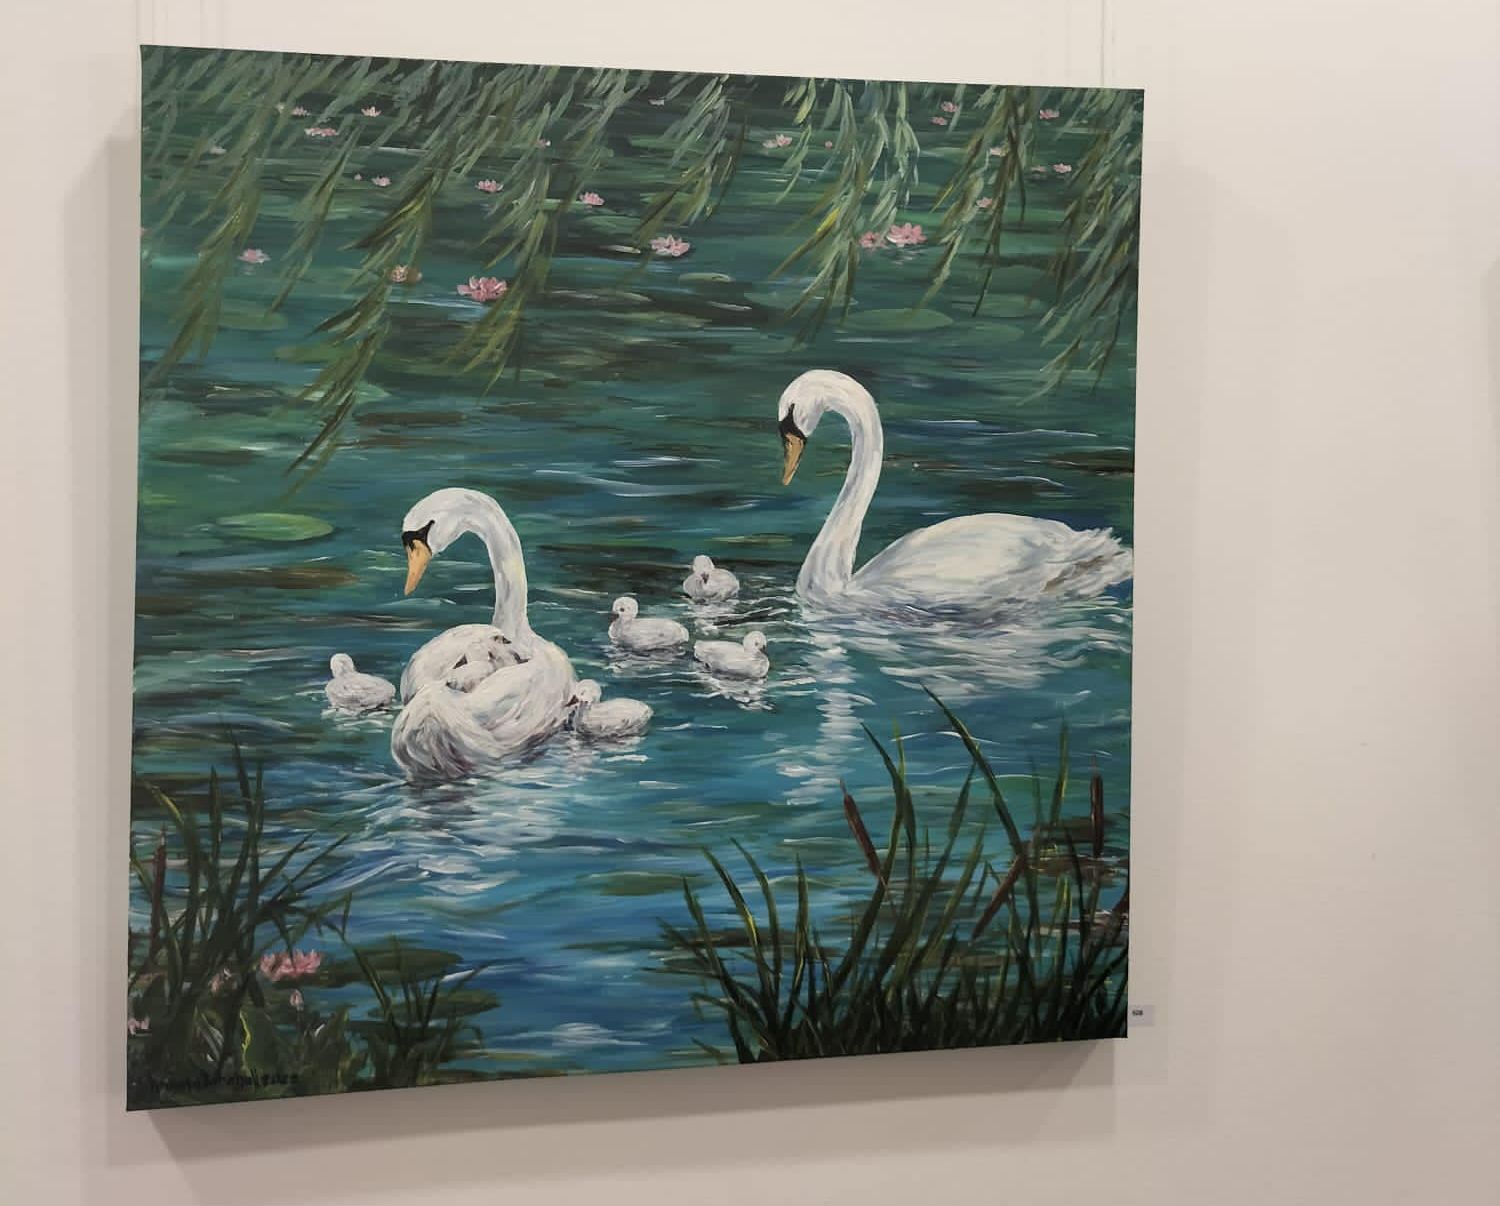 The Sefton Open exhibition is at The Atkinson in Southport. Photo by David Thackeray